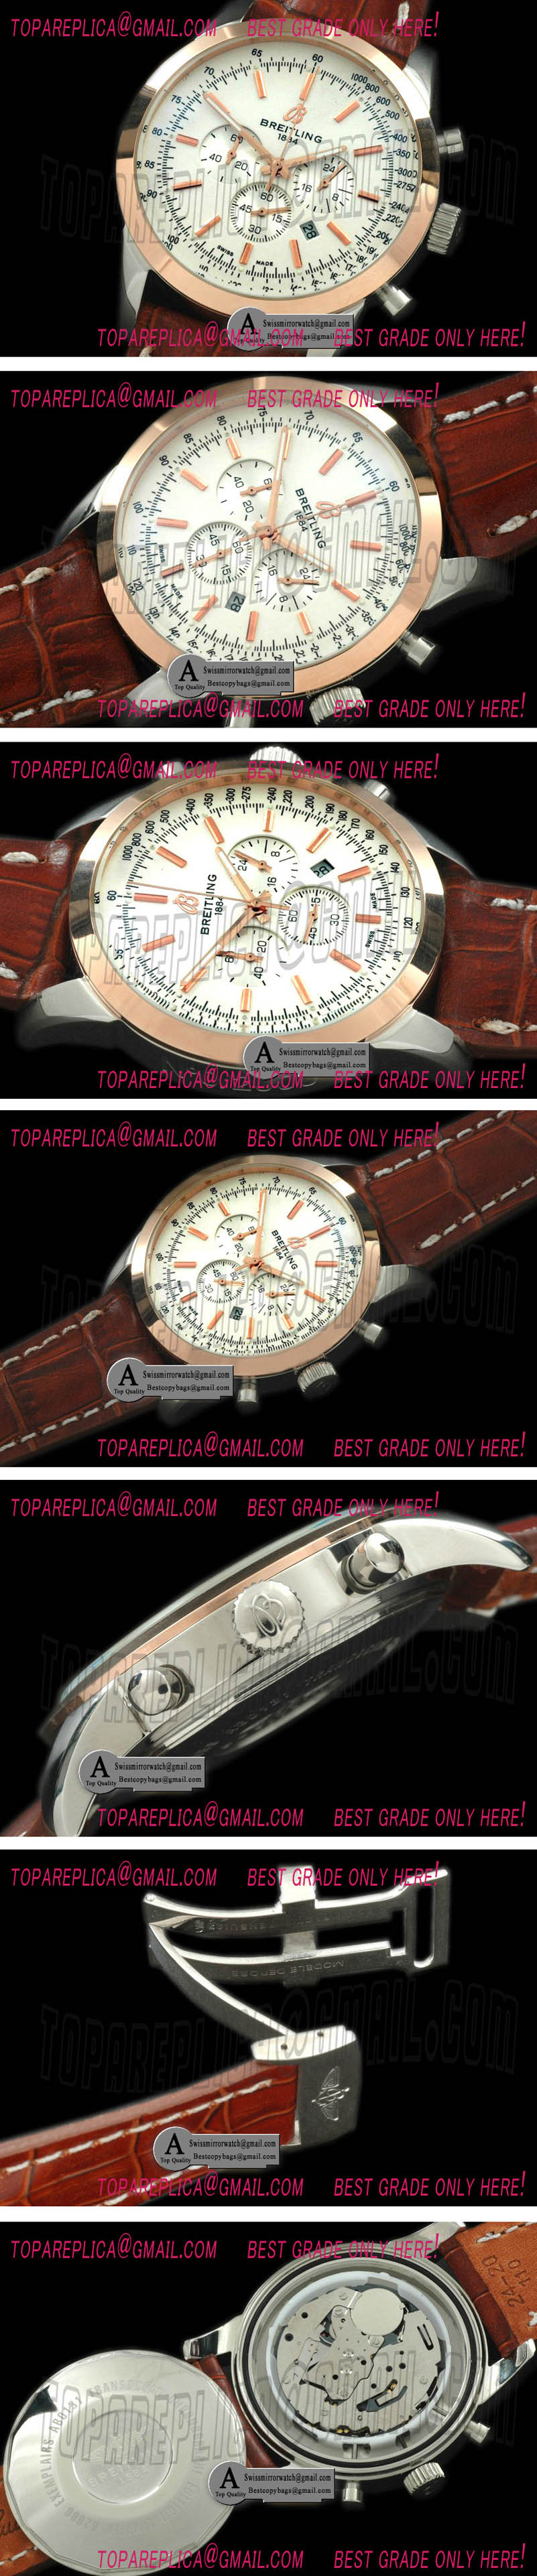 Breitling TransOcean Chrono SS/Yellow Gold/Leather White Jap OS20 Qtz Replica Watches